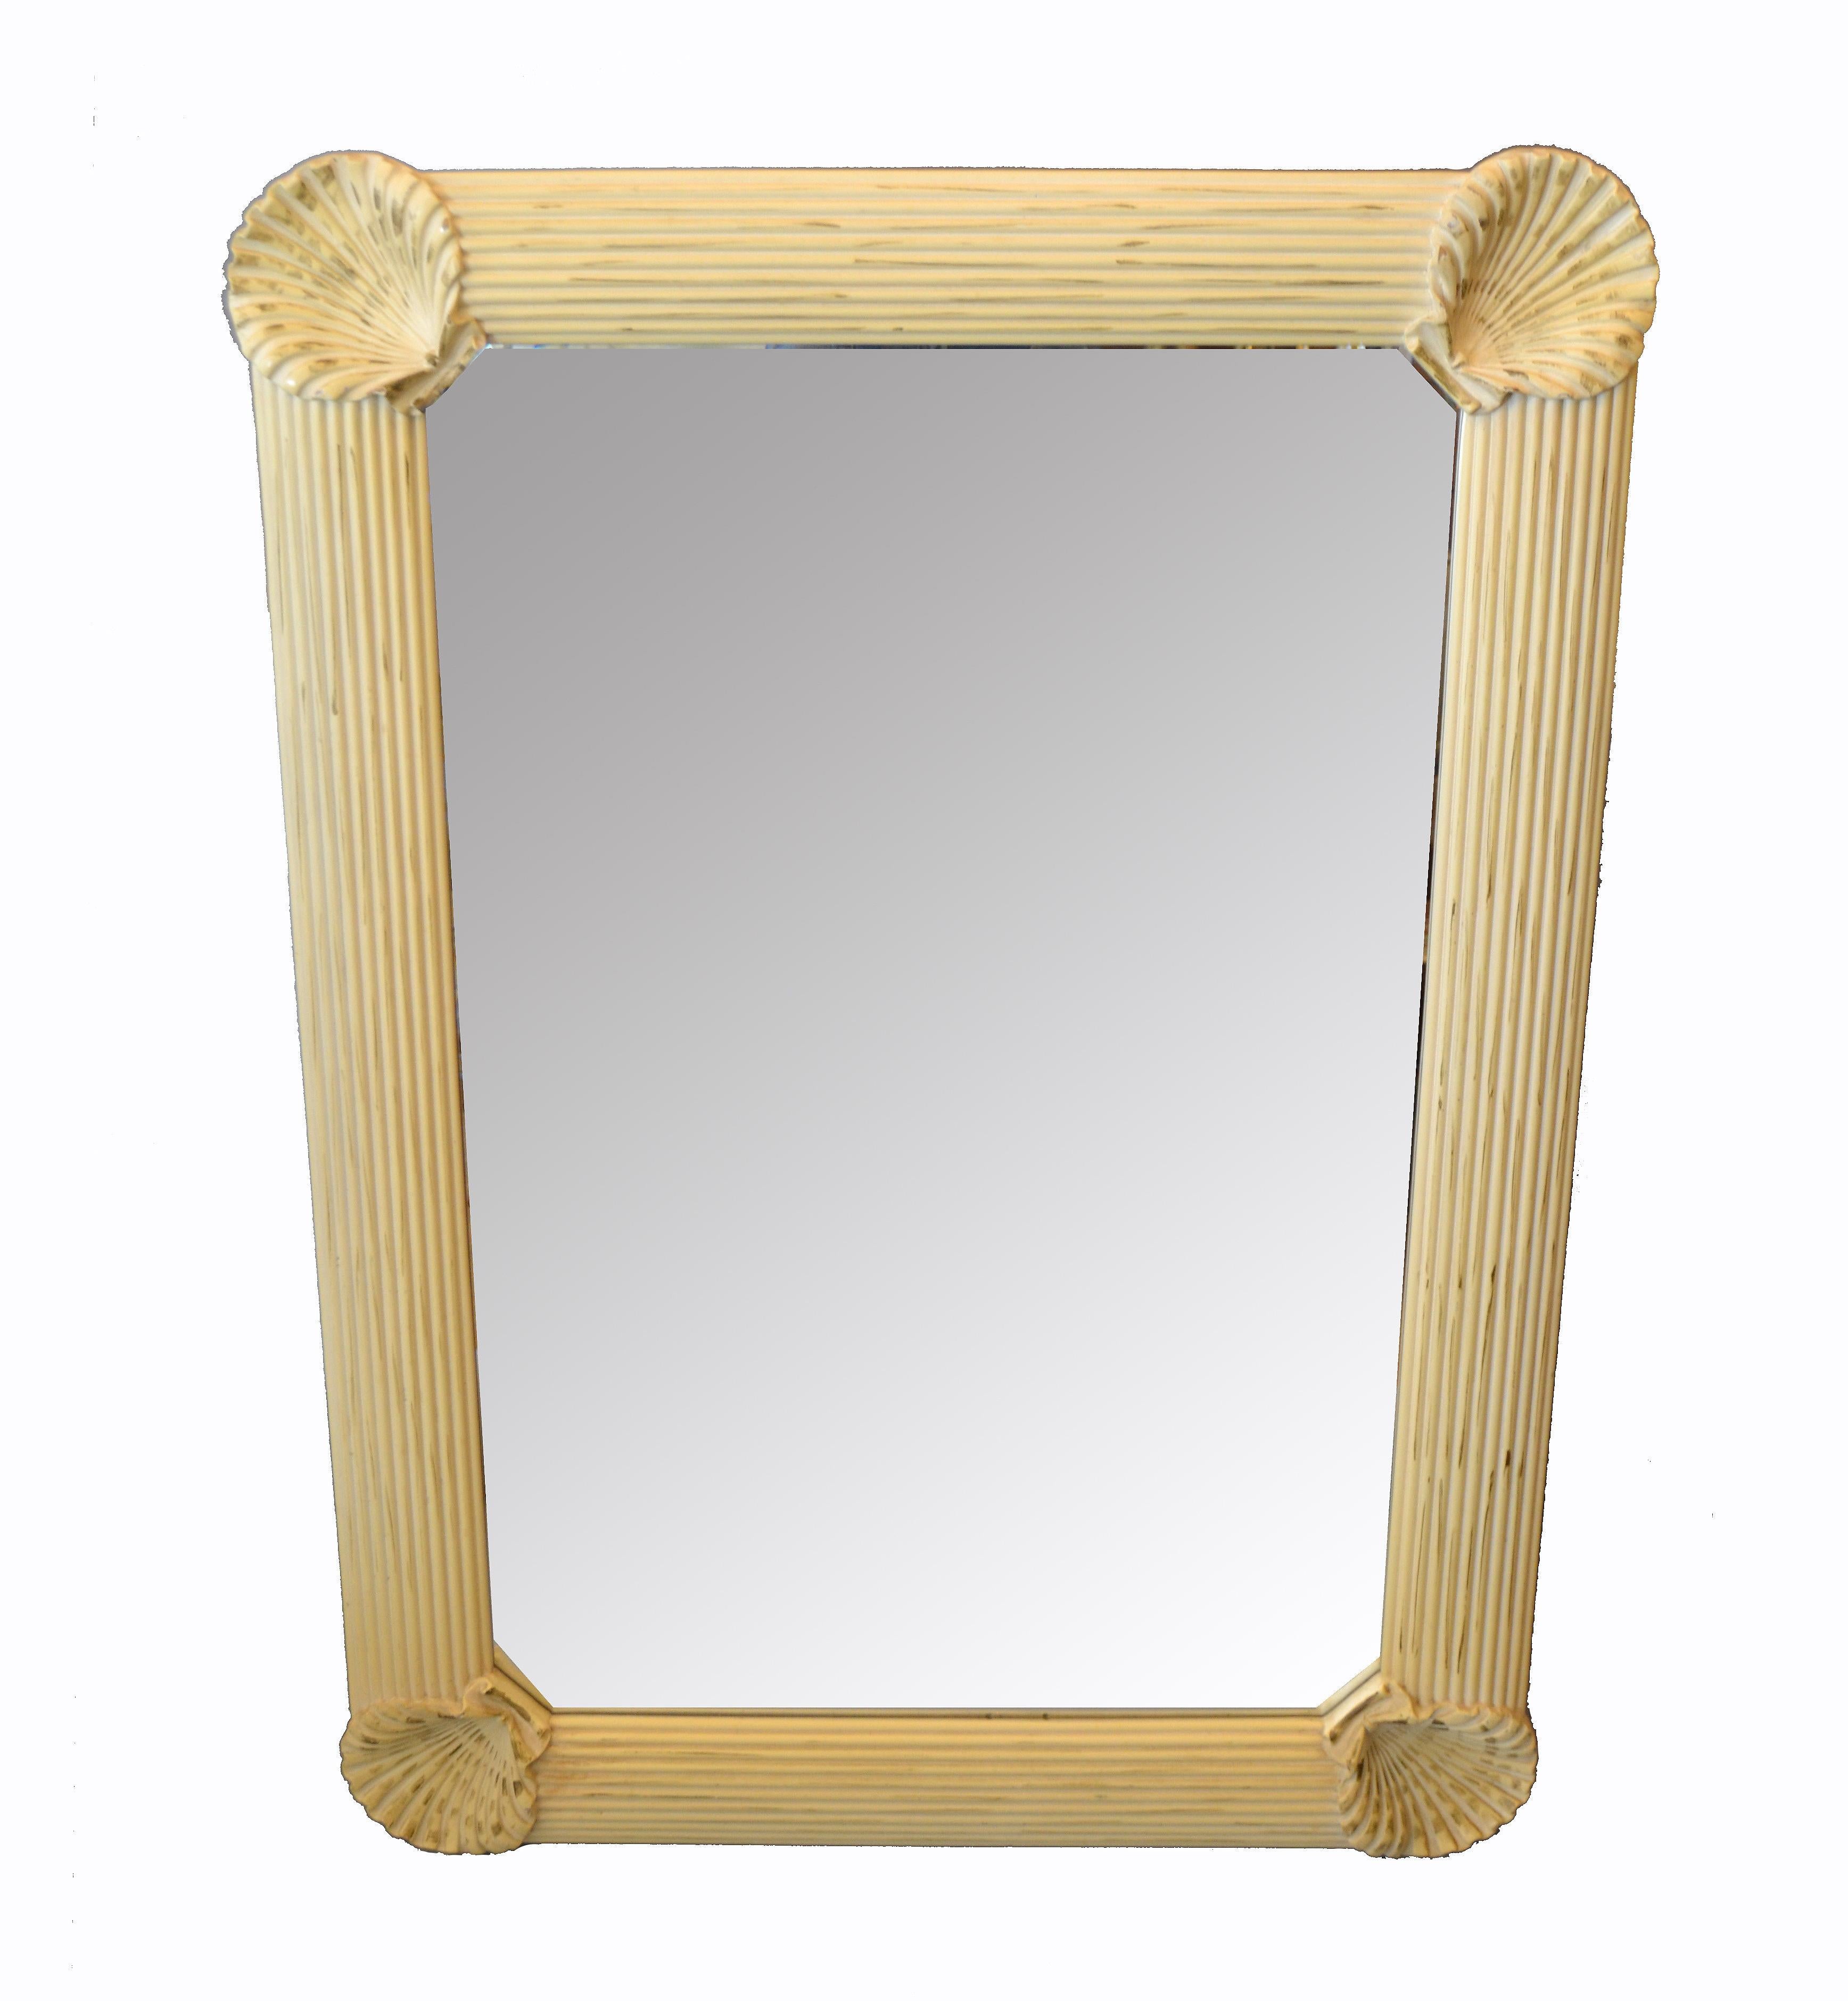 Hollywood Regency nautical wooden rectangular yellow-beige seashell beveled wall mirror.
Mirror size: 22.35 inches x 35 inches.